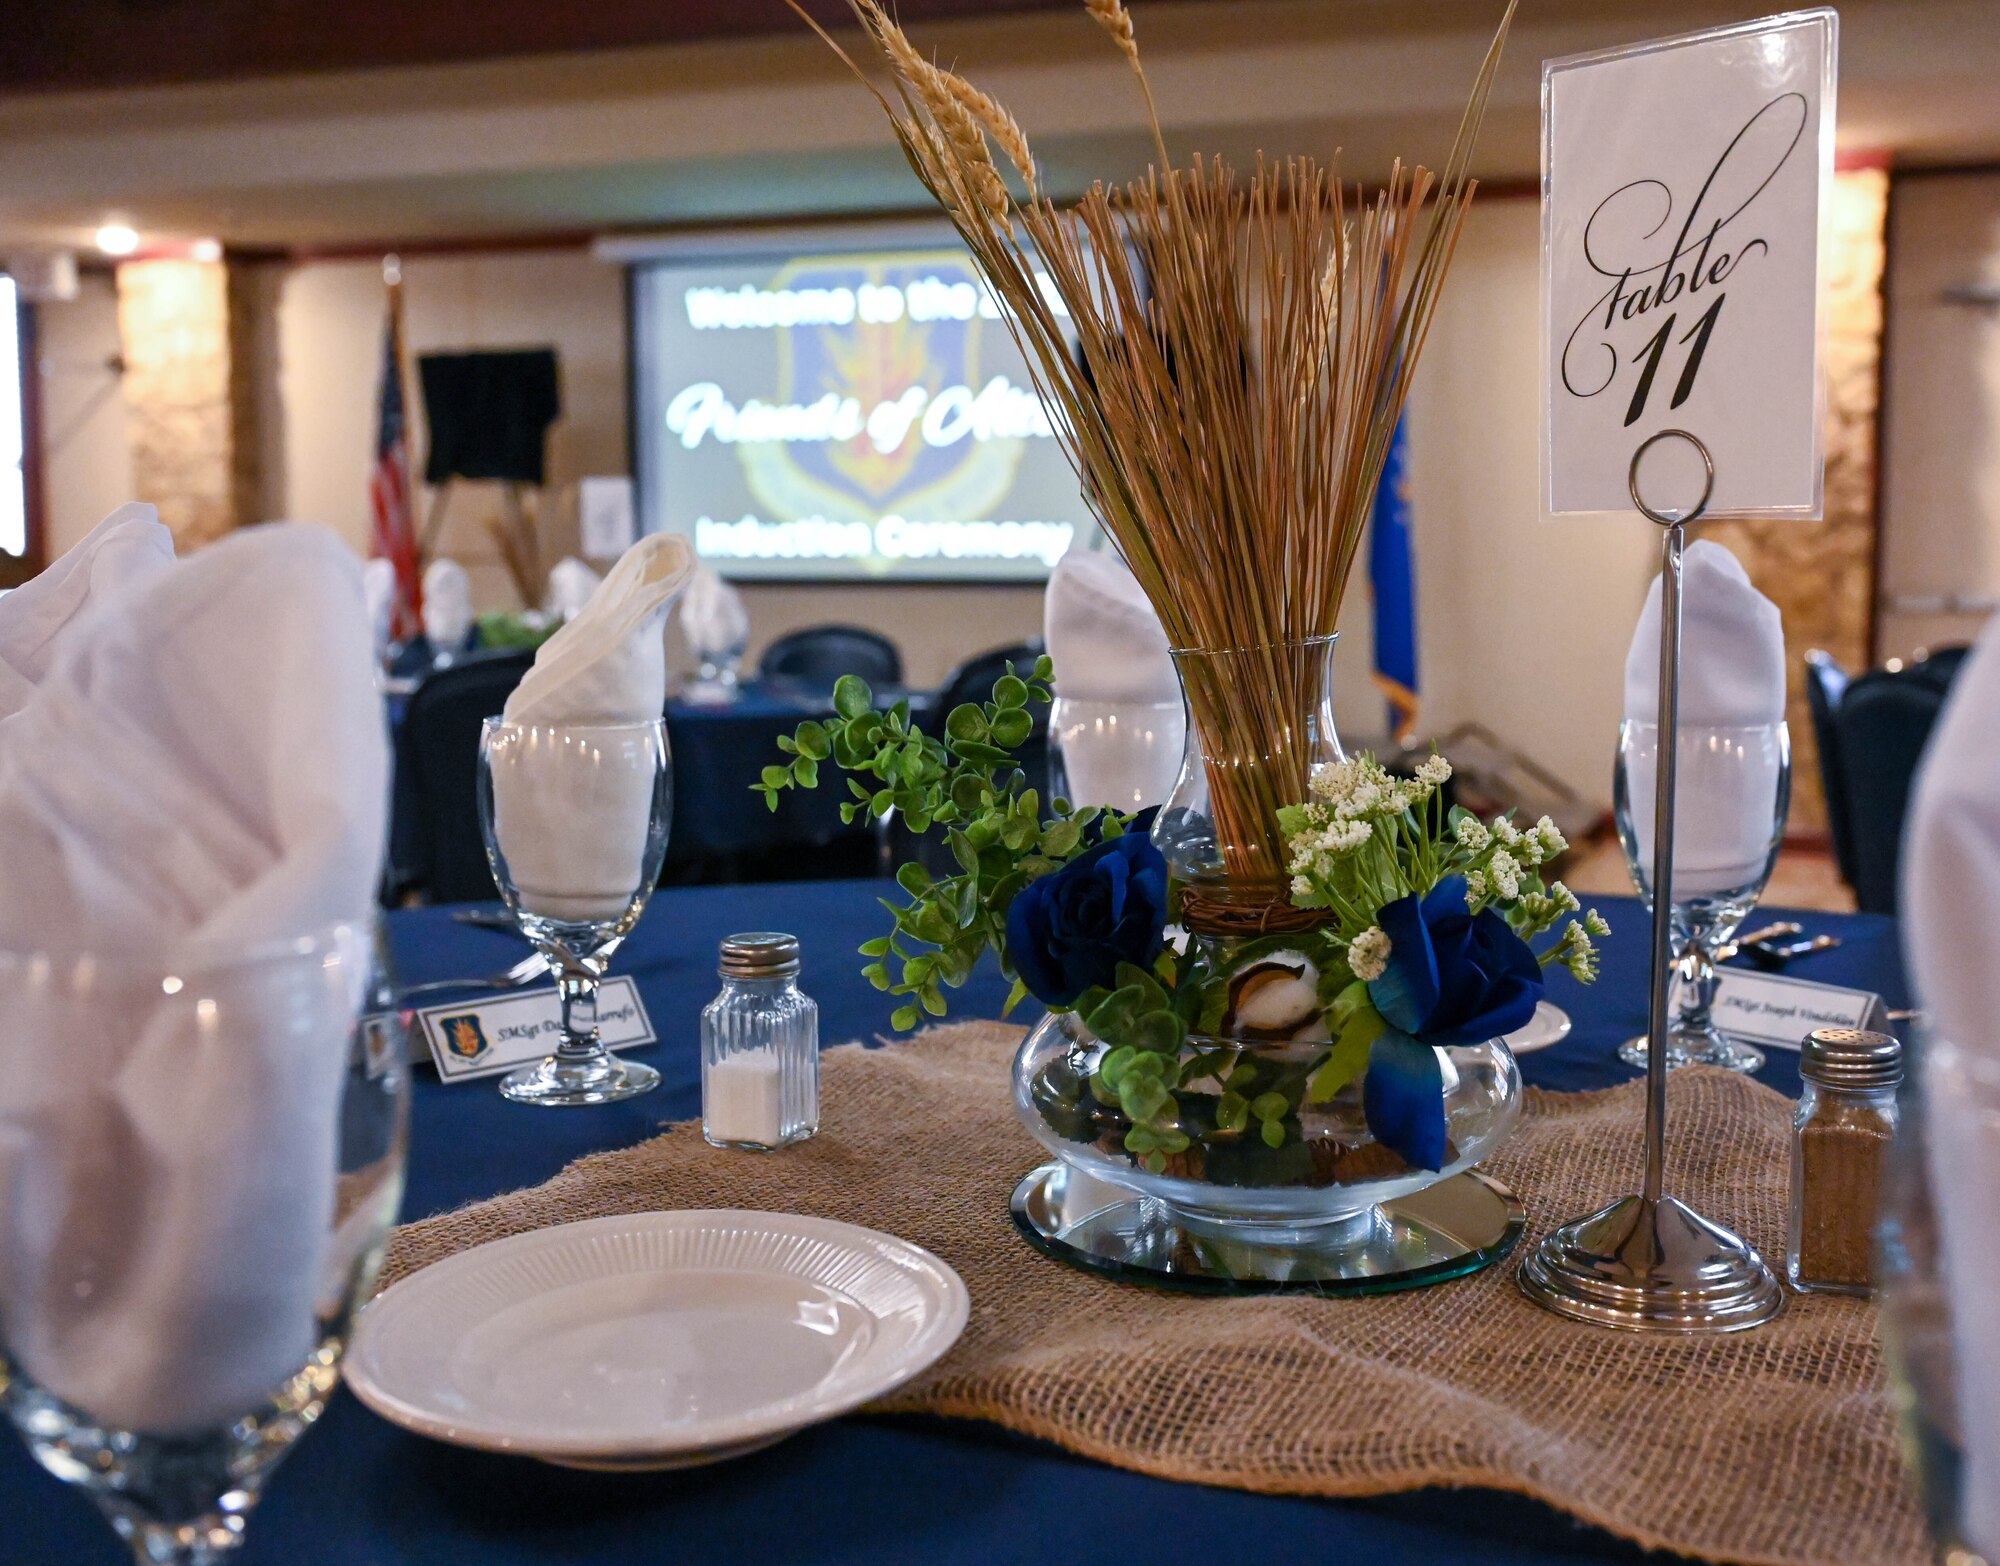 Decor that represents the local community is displayed on a dining table during the Friends of Altus ceremony at Altus Air Force Base, Oklahoma, July 11, 2023. The event was held to honor local civic leaders for their stewardship and contributions to the Altus community. (U.S. Air Force photo by Airman 1st Class Heidi Bucins)